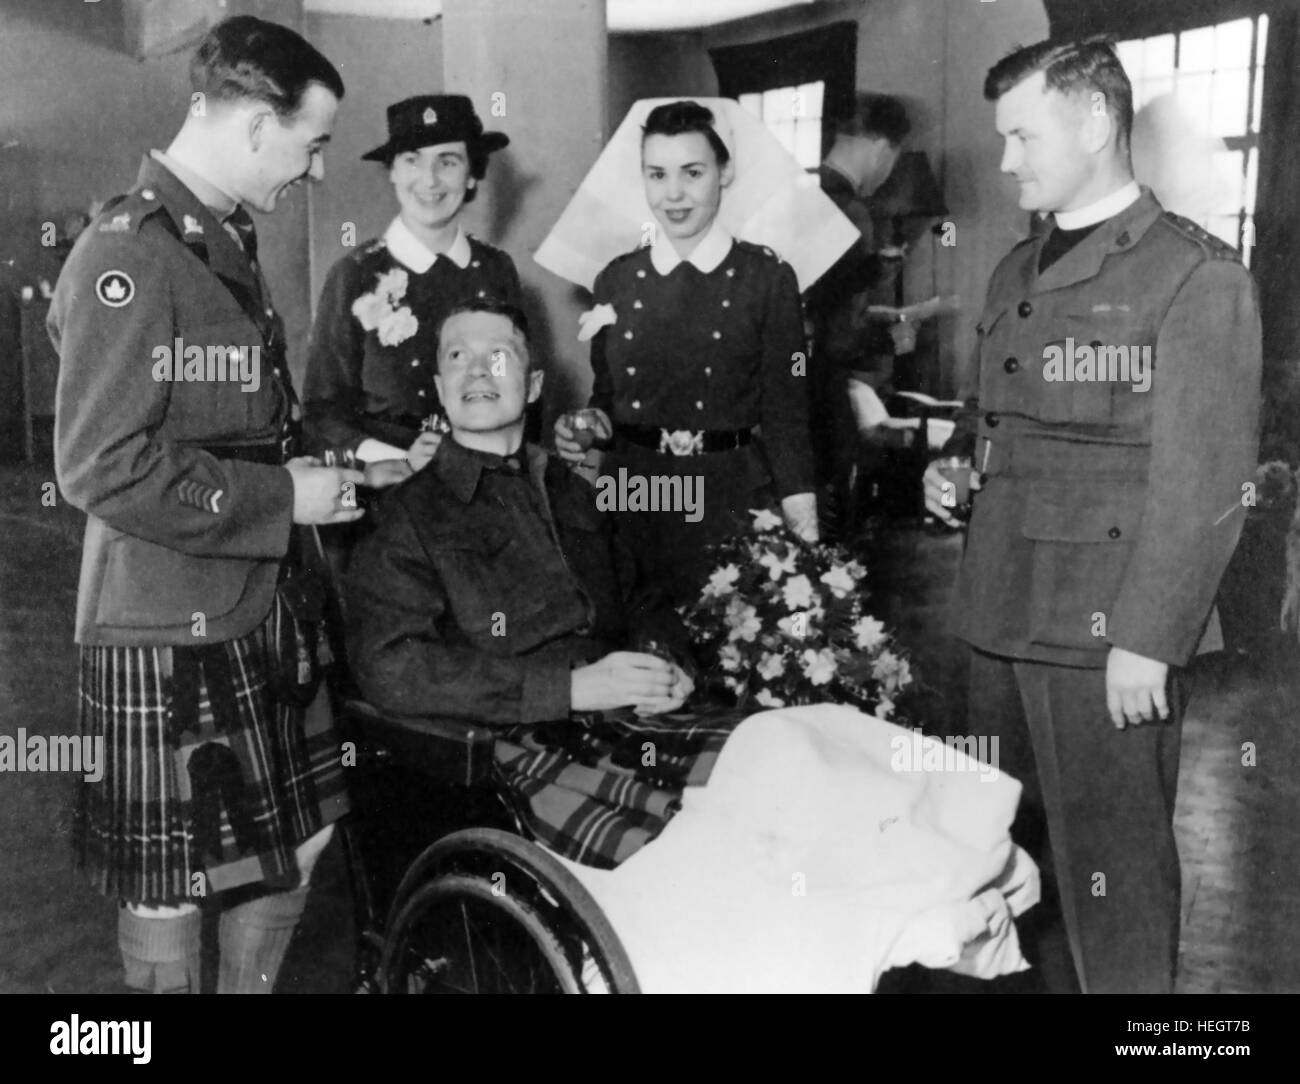 FREDERICK ALBERT TILSTON VC (1906-1992) Canadian soldier in the Essex Scottish Regiment awarded the VC for heroic action near Uedem, Germany, on 1 March 1945. He lost both legs. Stock Photo